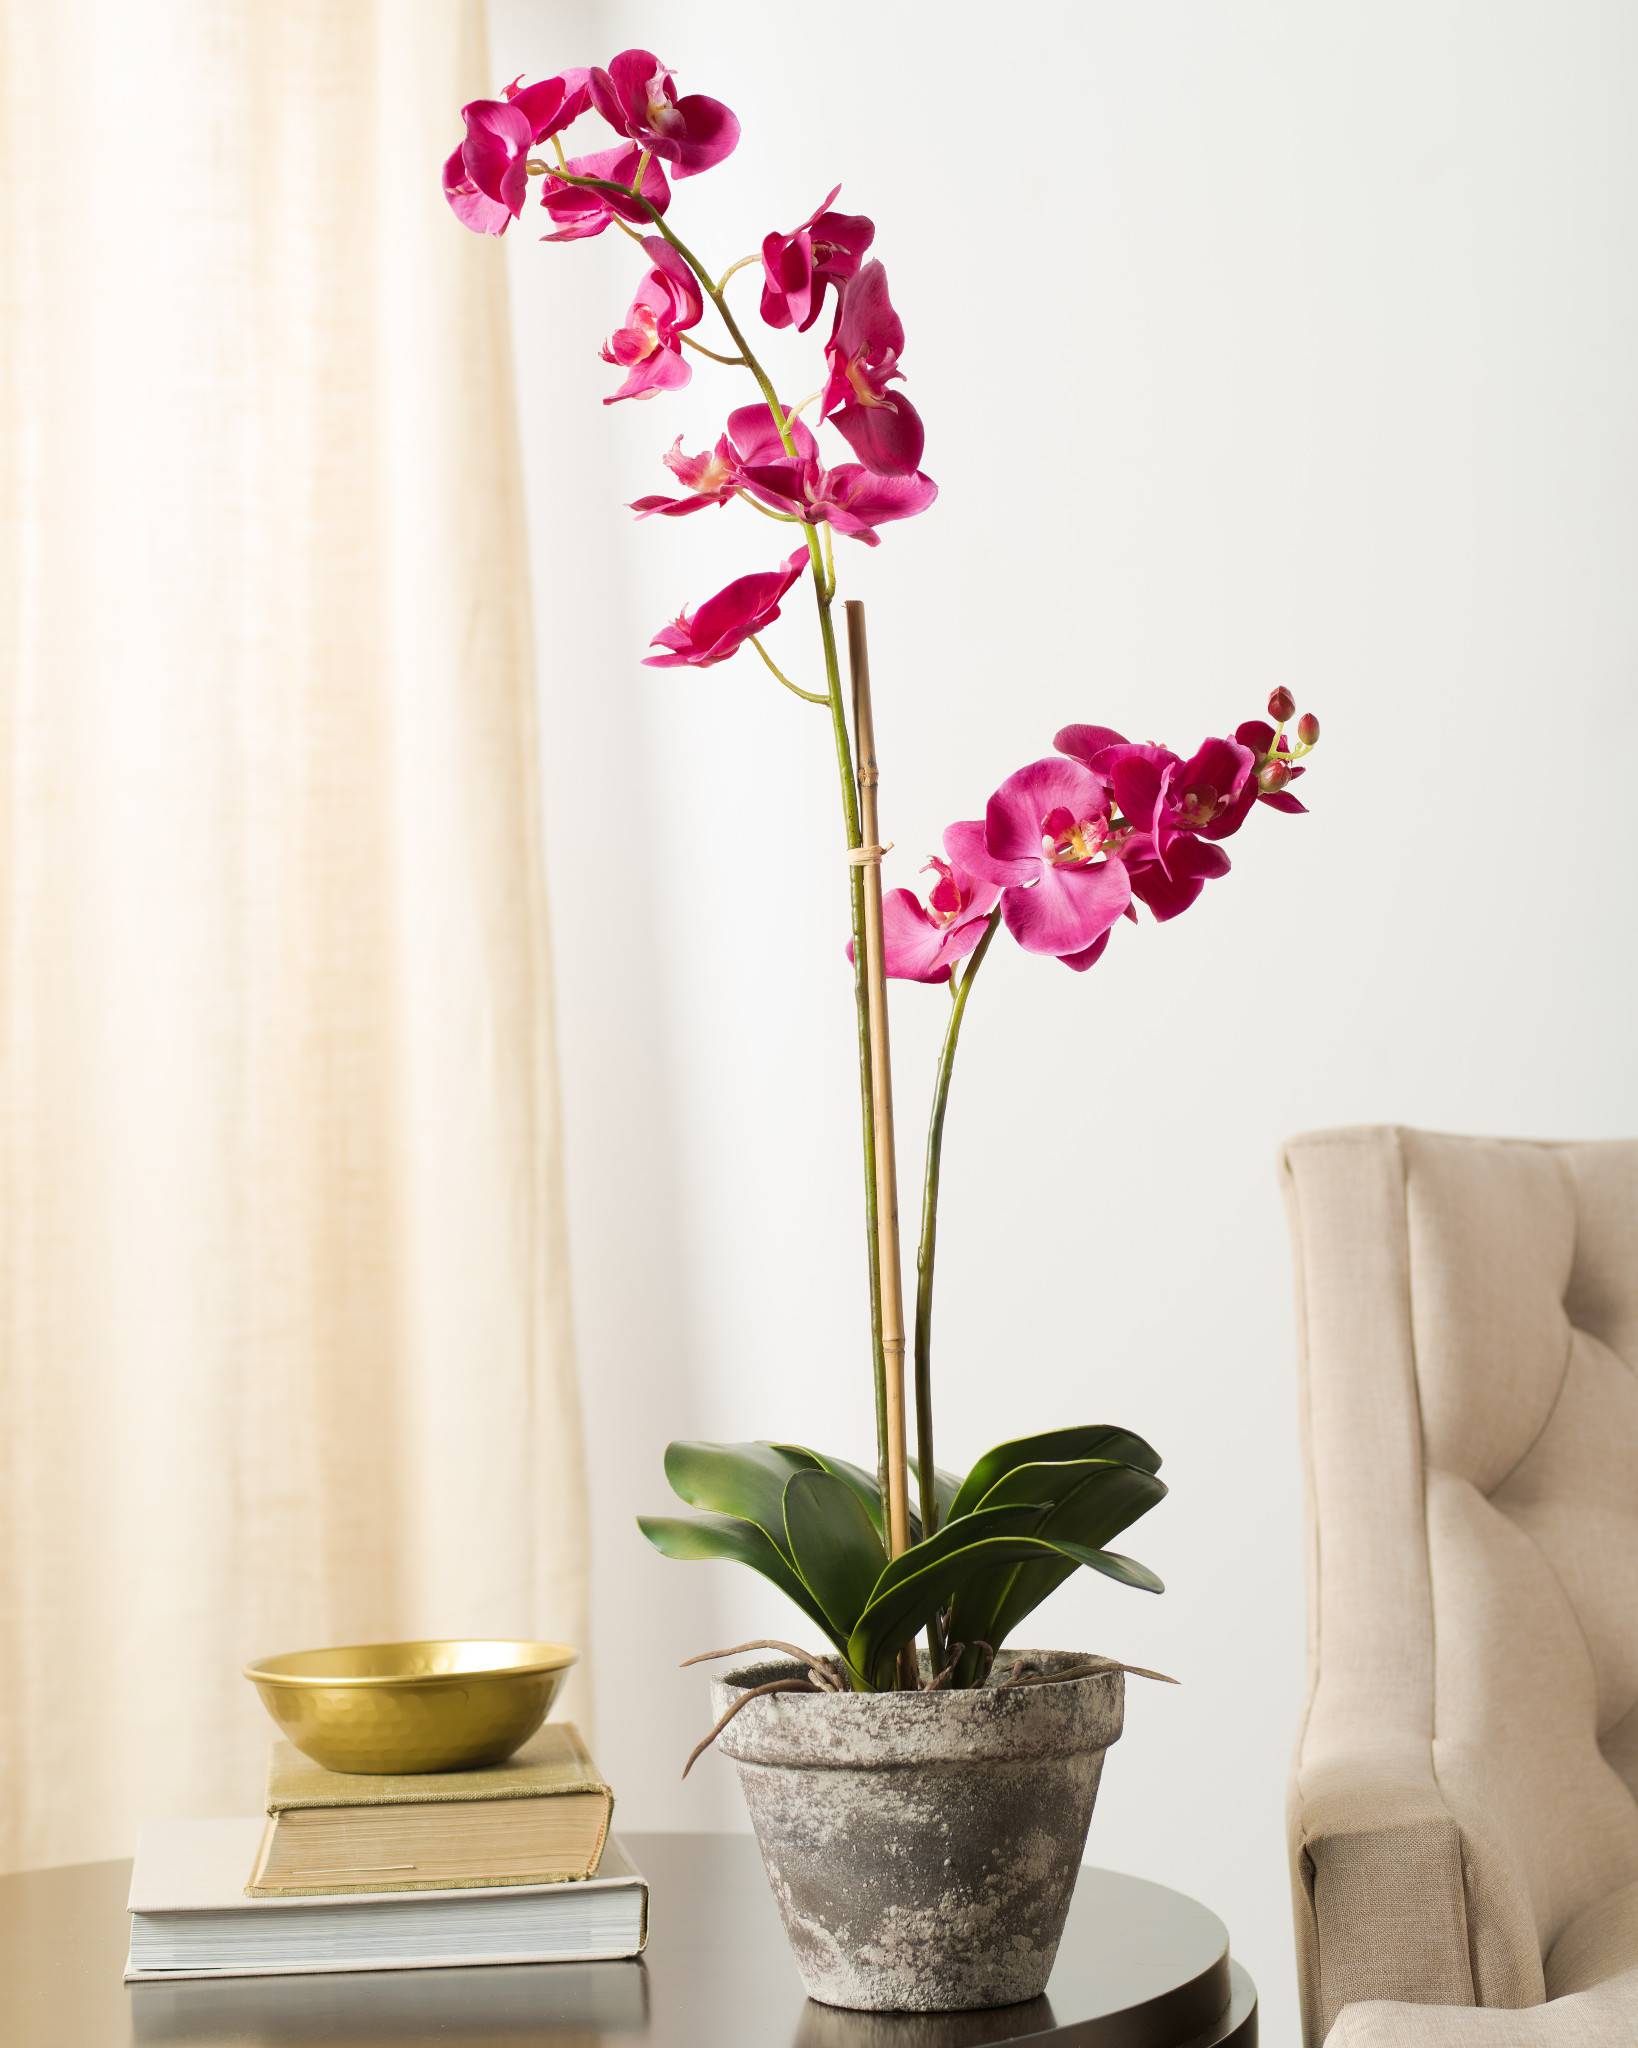 Phalaenopsis Orchid Potted Plant | Balsam Hill